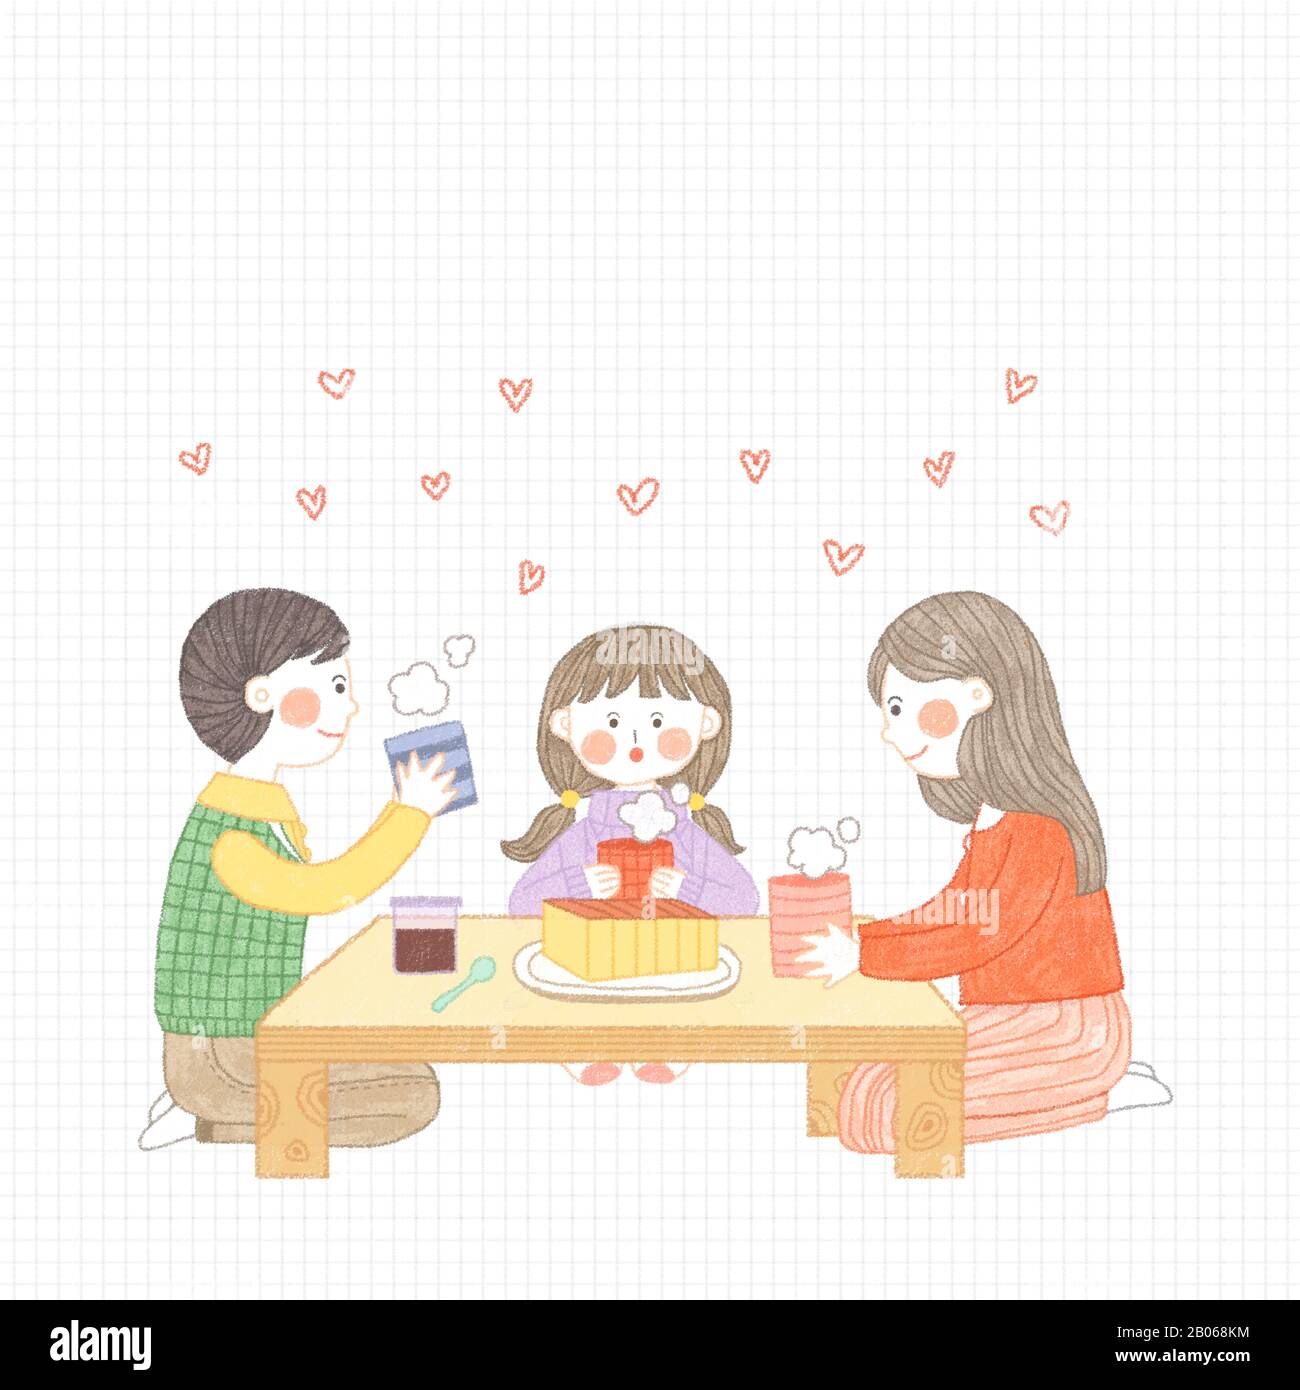 Happy time of family in winter illustration 004 Stock Vector